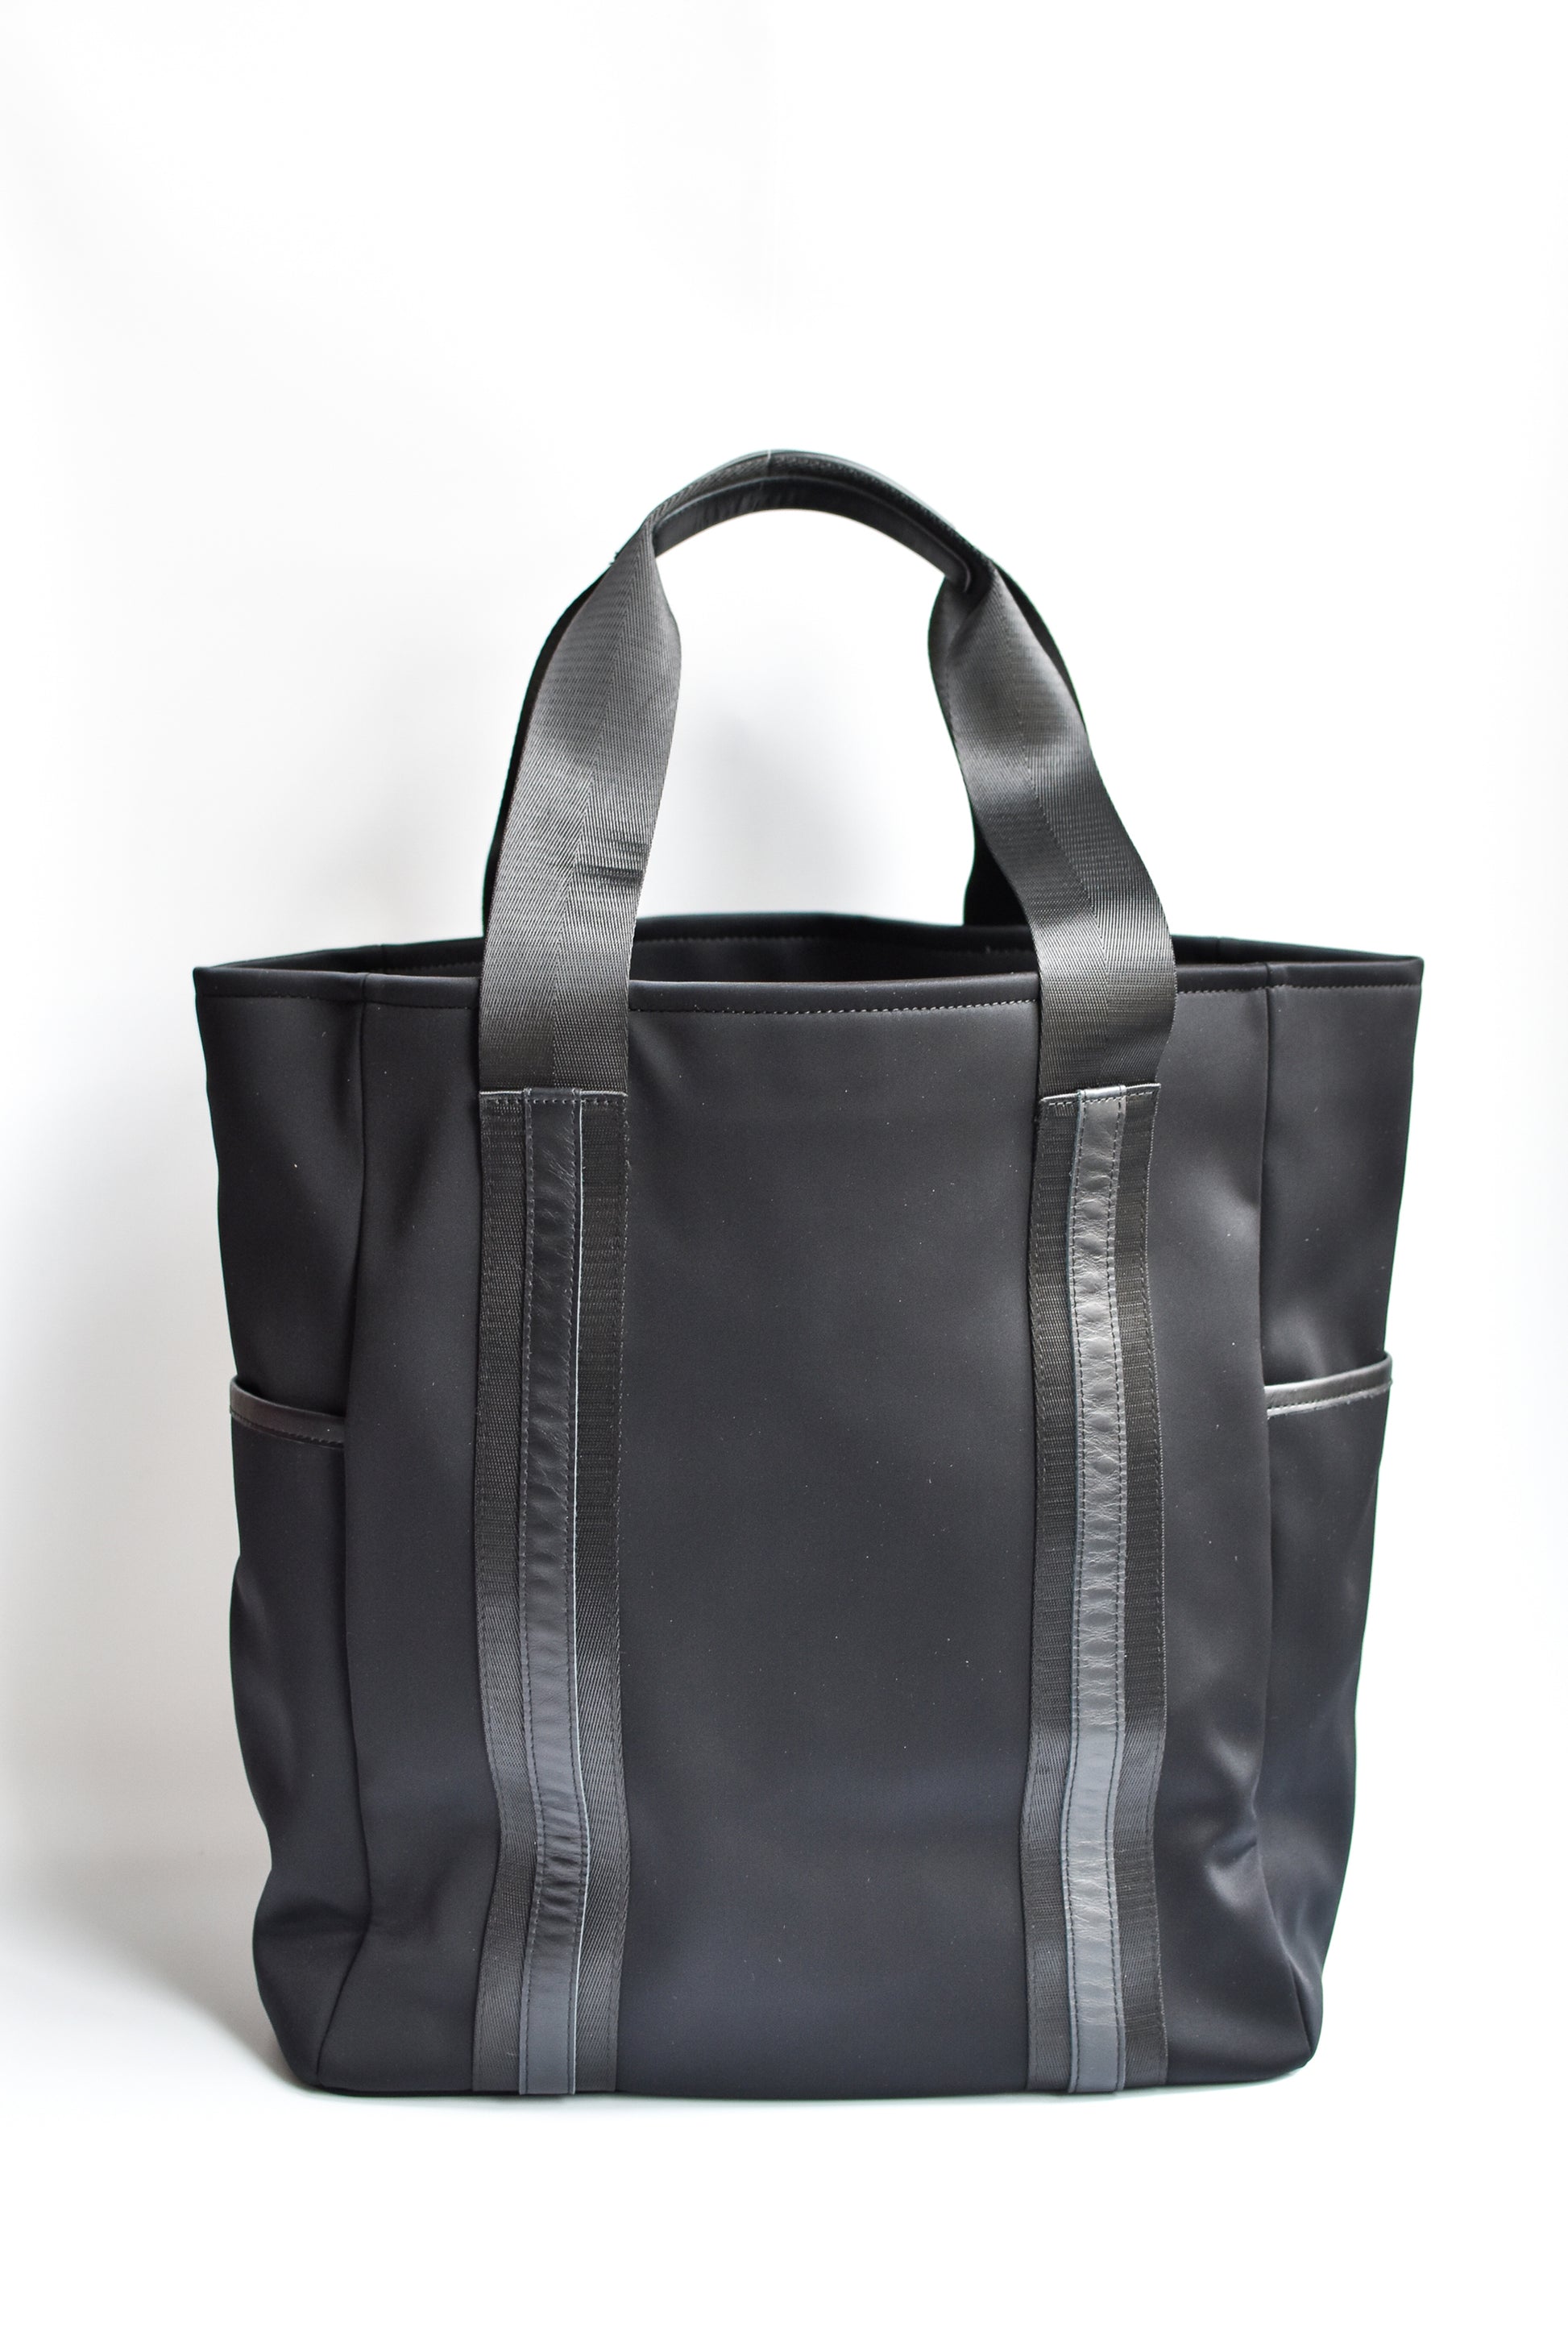 Black neoprene tote bag with high shine cinch top closure and leather details. 